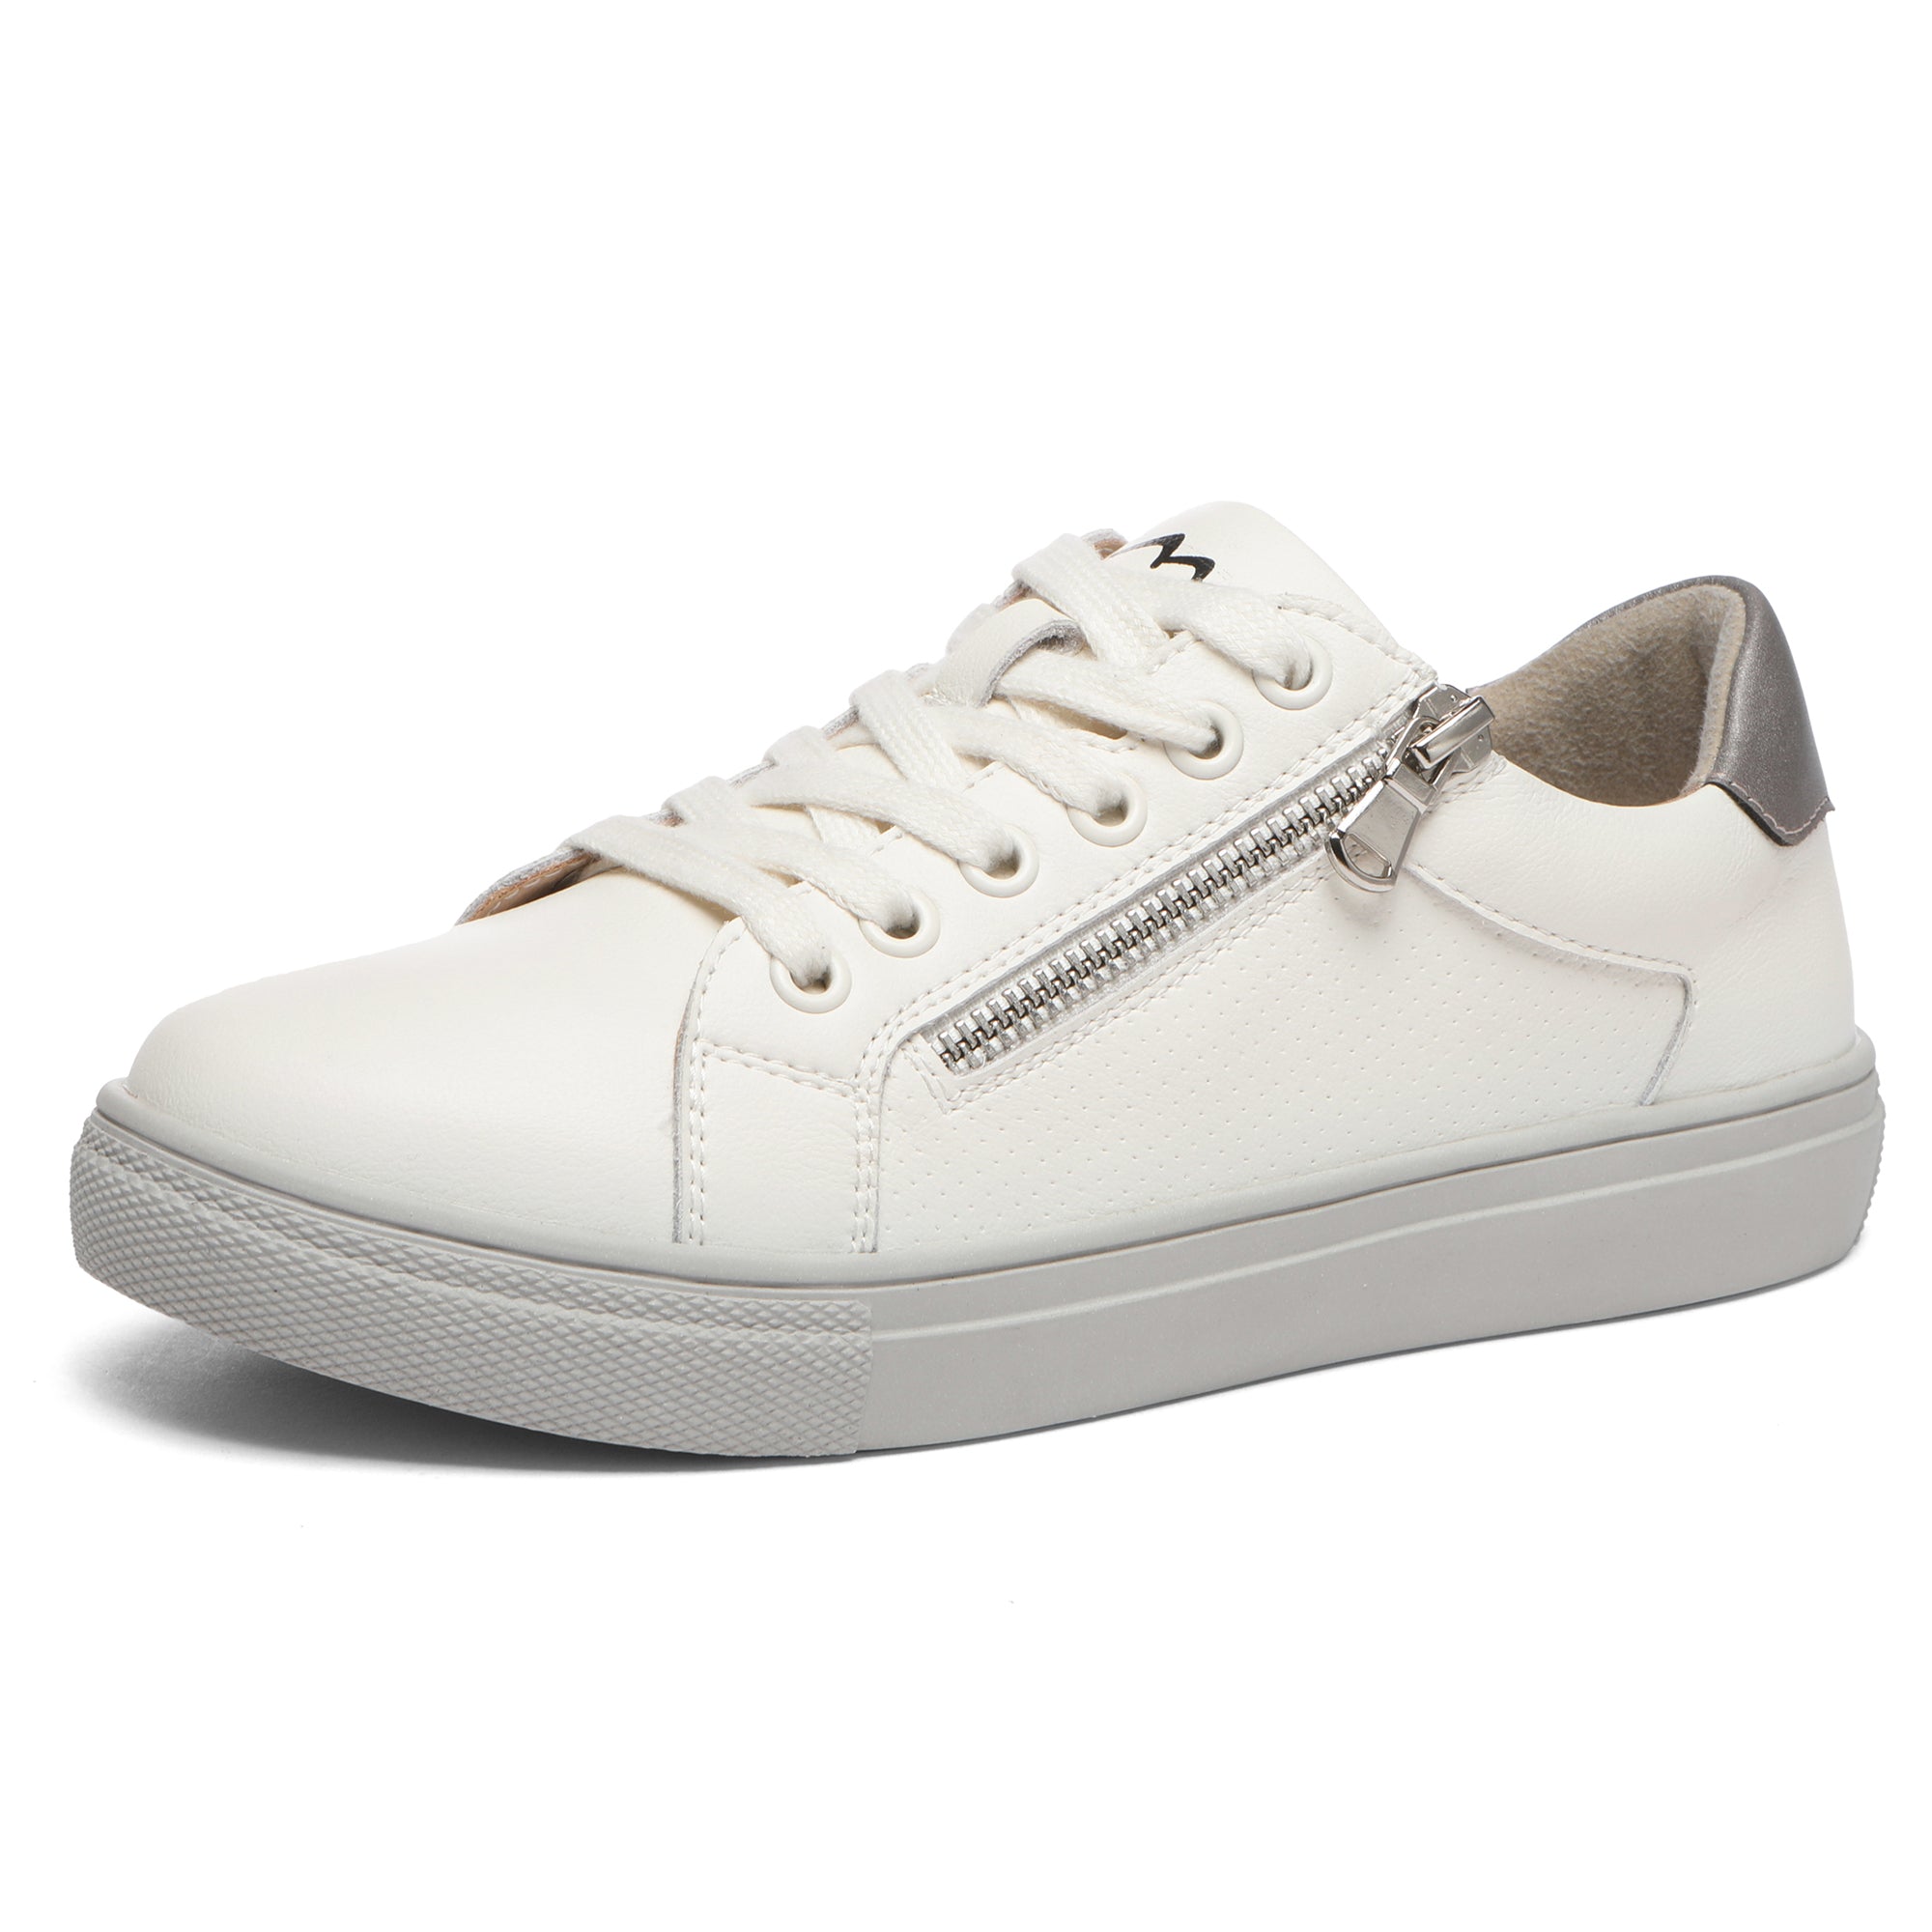 Chloe White Leather Sneakers